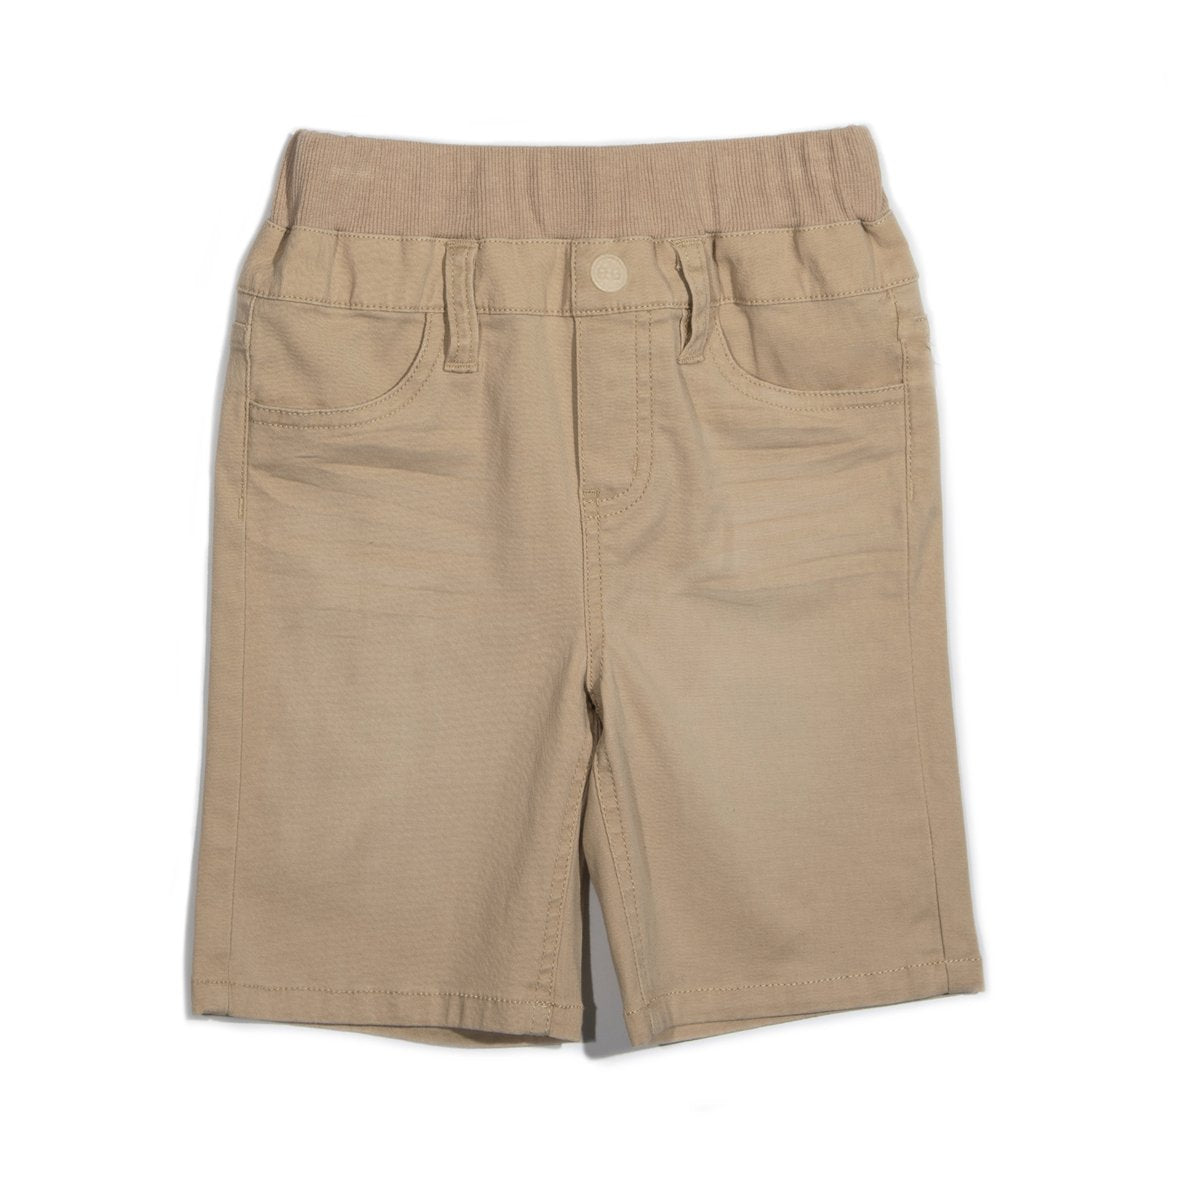 The Perfect Short in Khaki